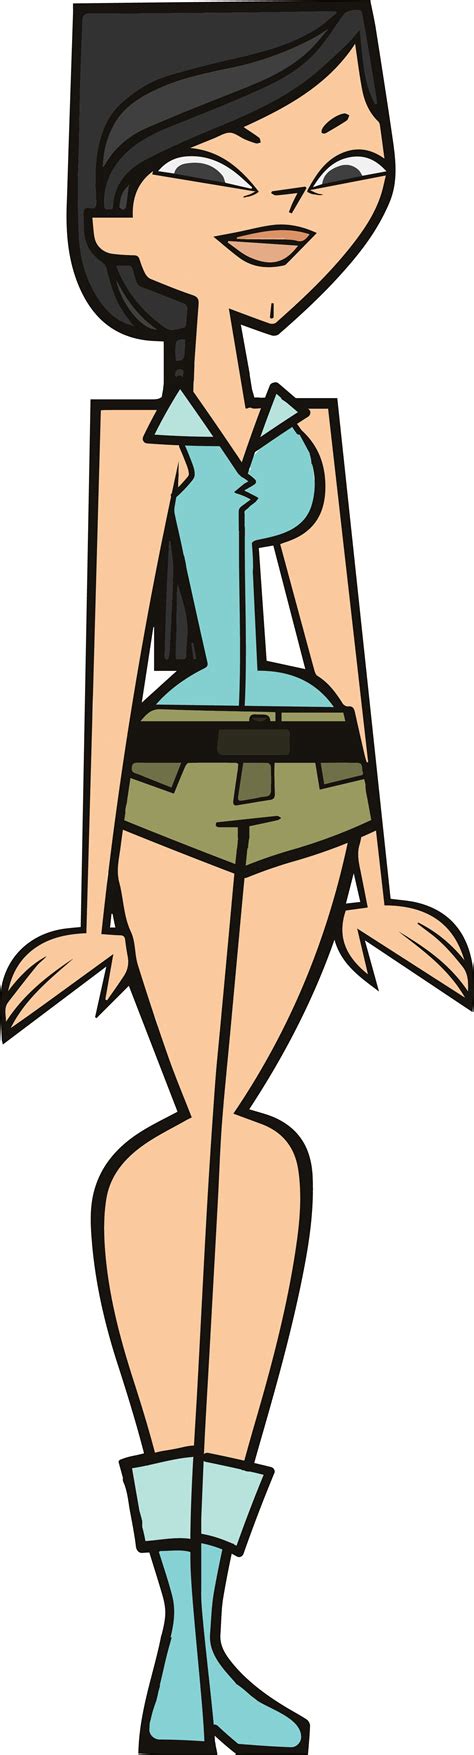 heather tdi    total drama casts clipart full size clipart images   finder